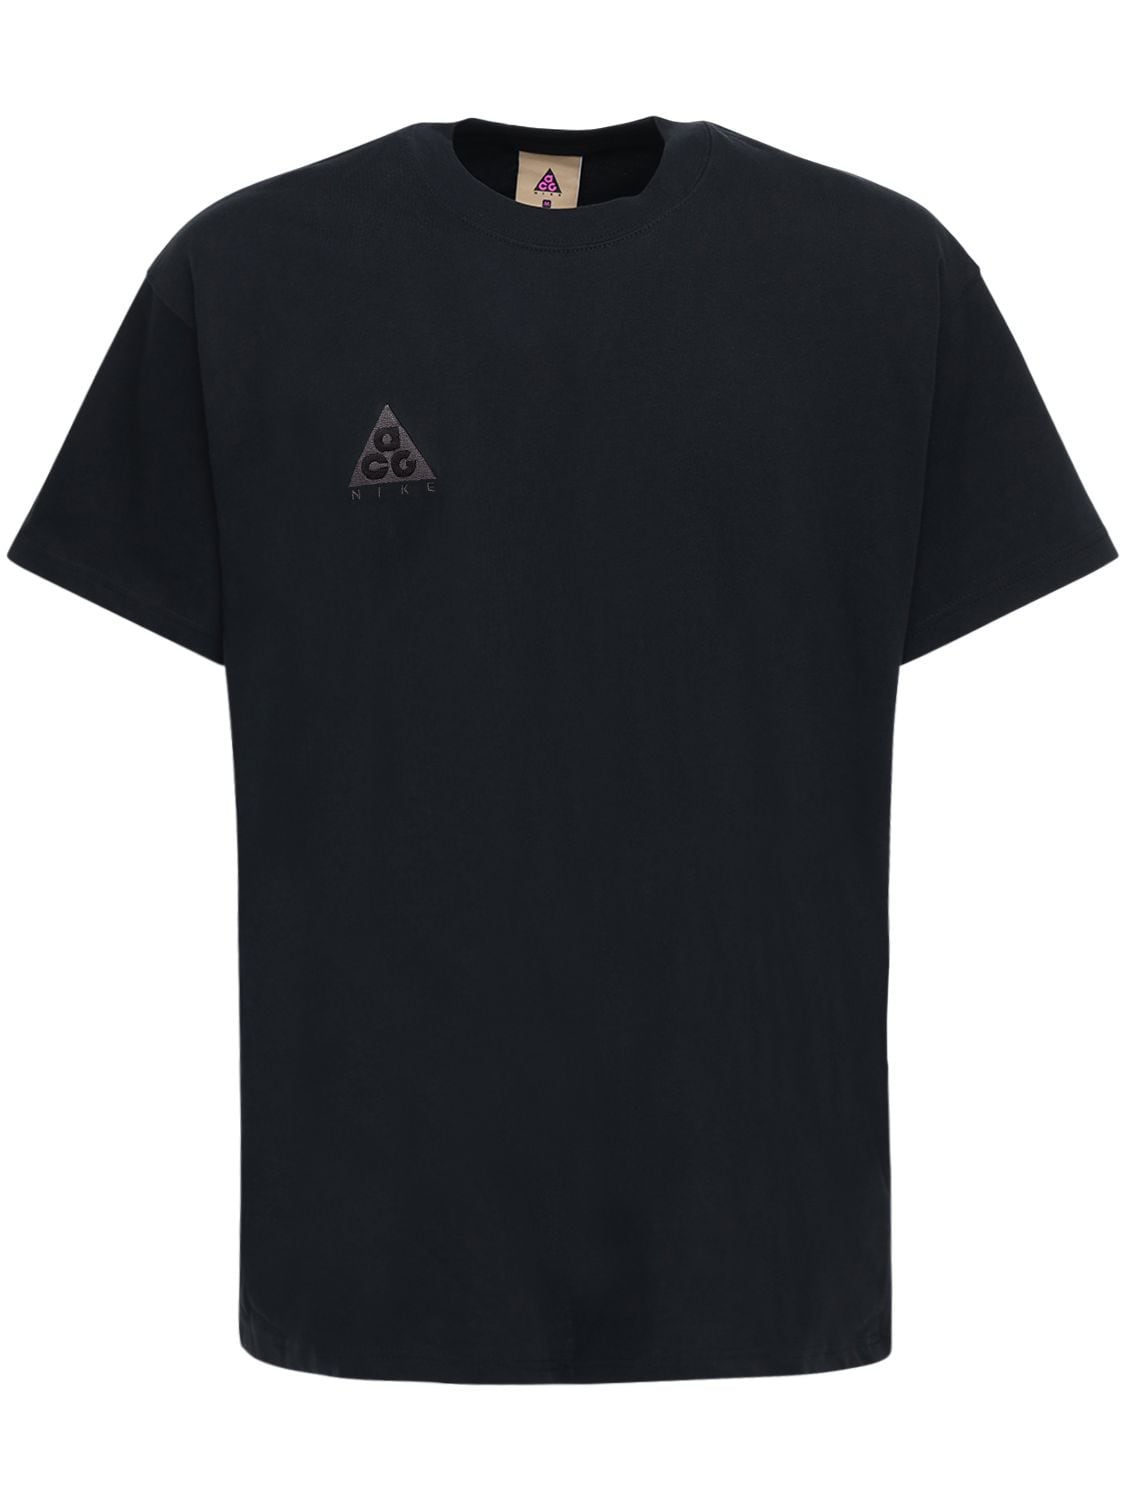 Nike Acg Embroidery Cotton T-shirt In Black